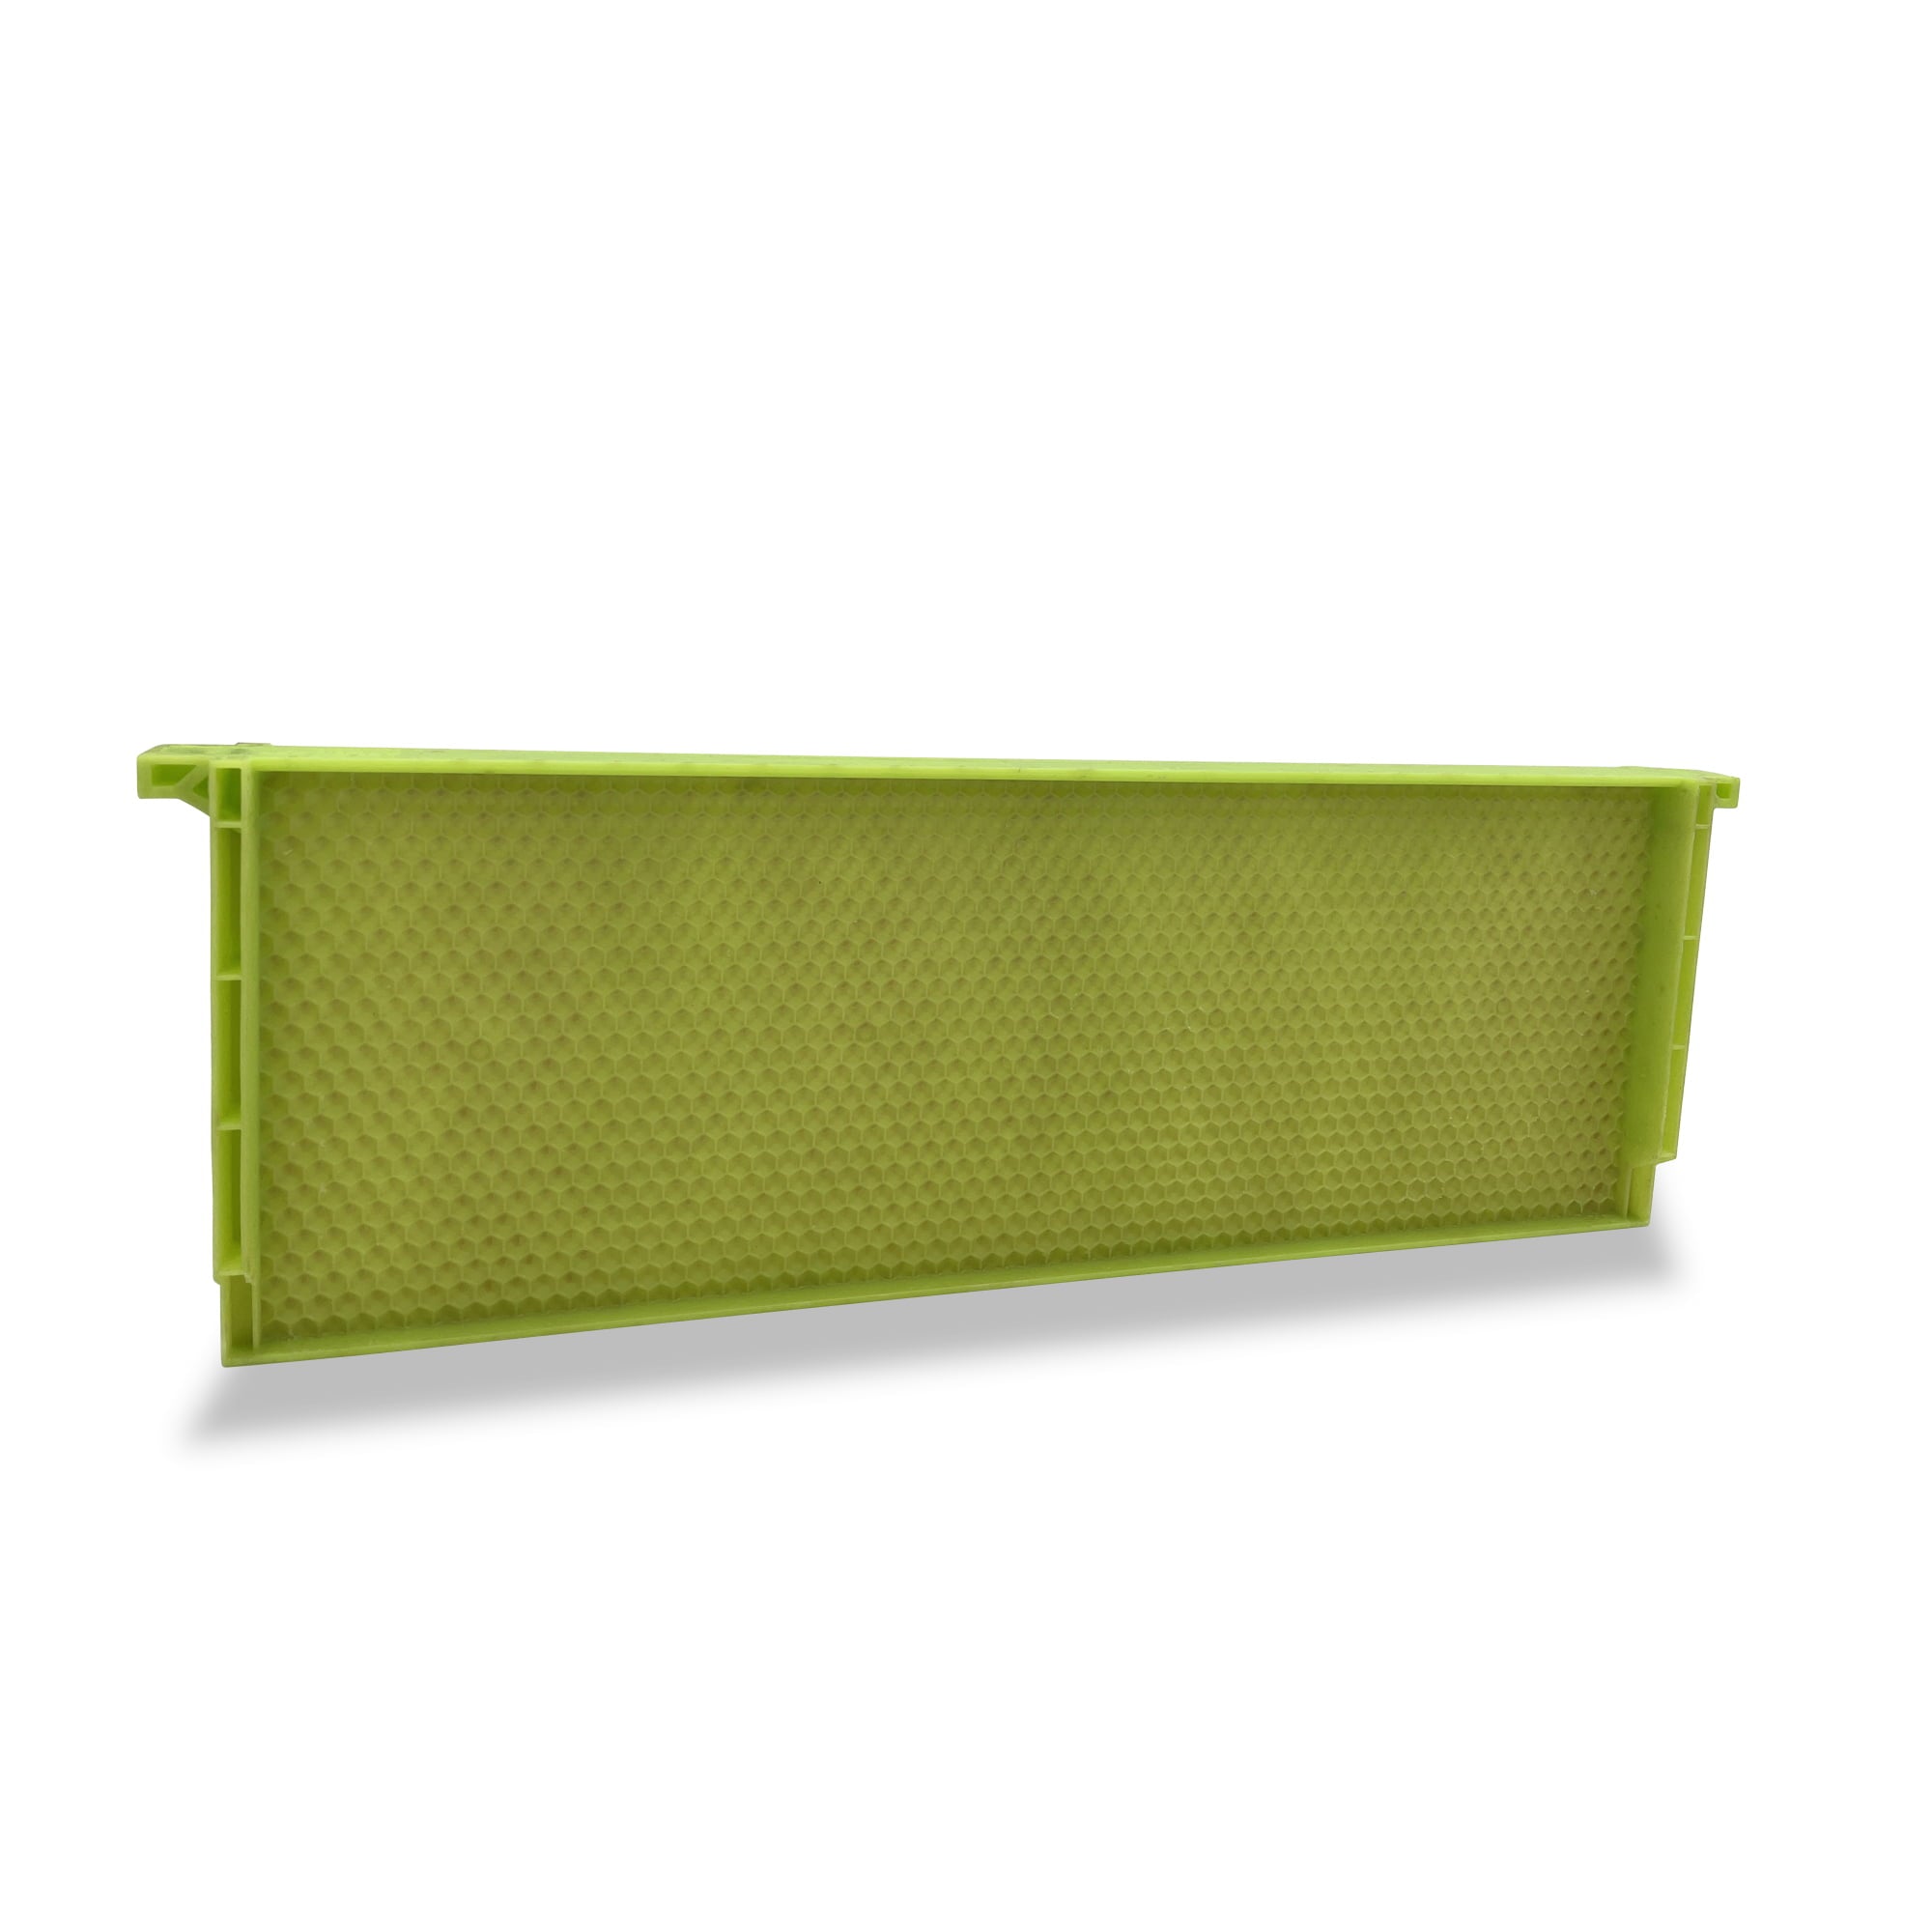 Green Drone Comb Frame For beekeeping